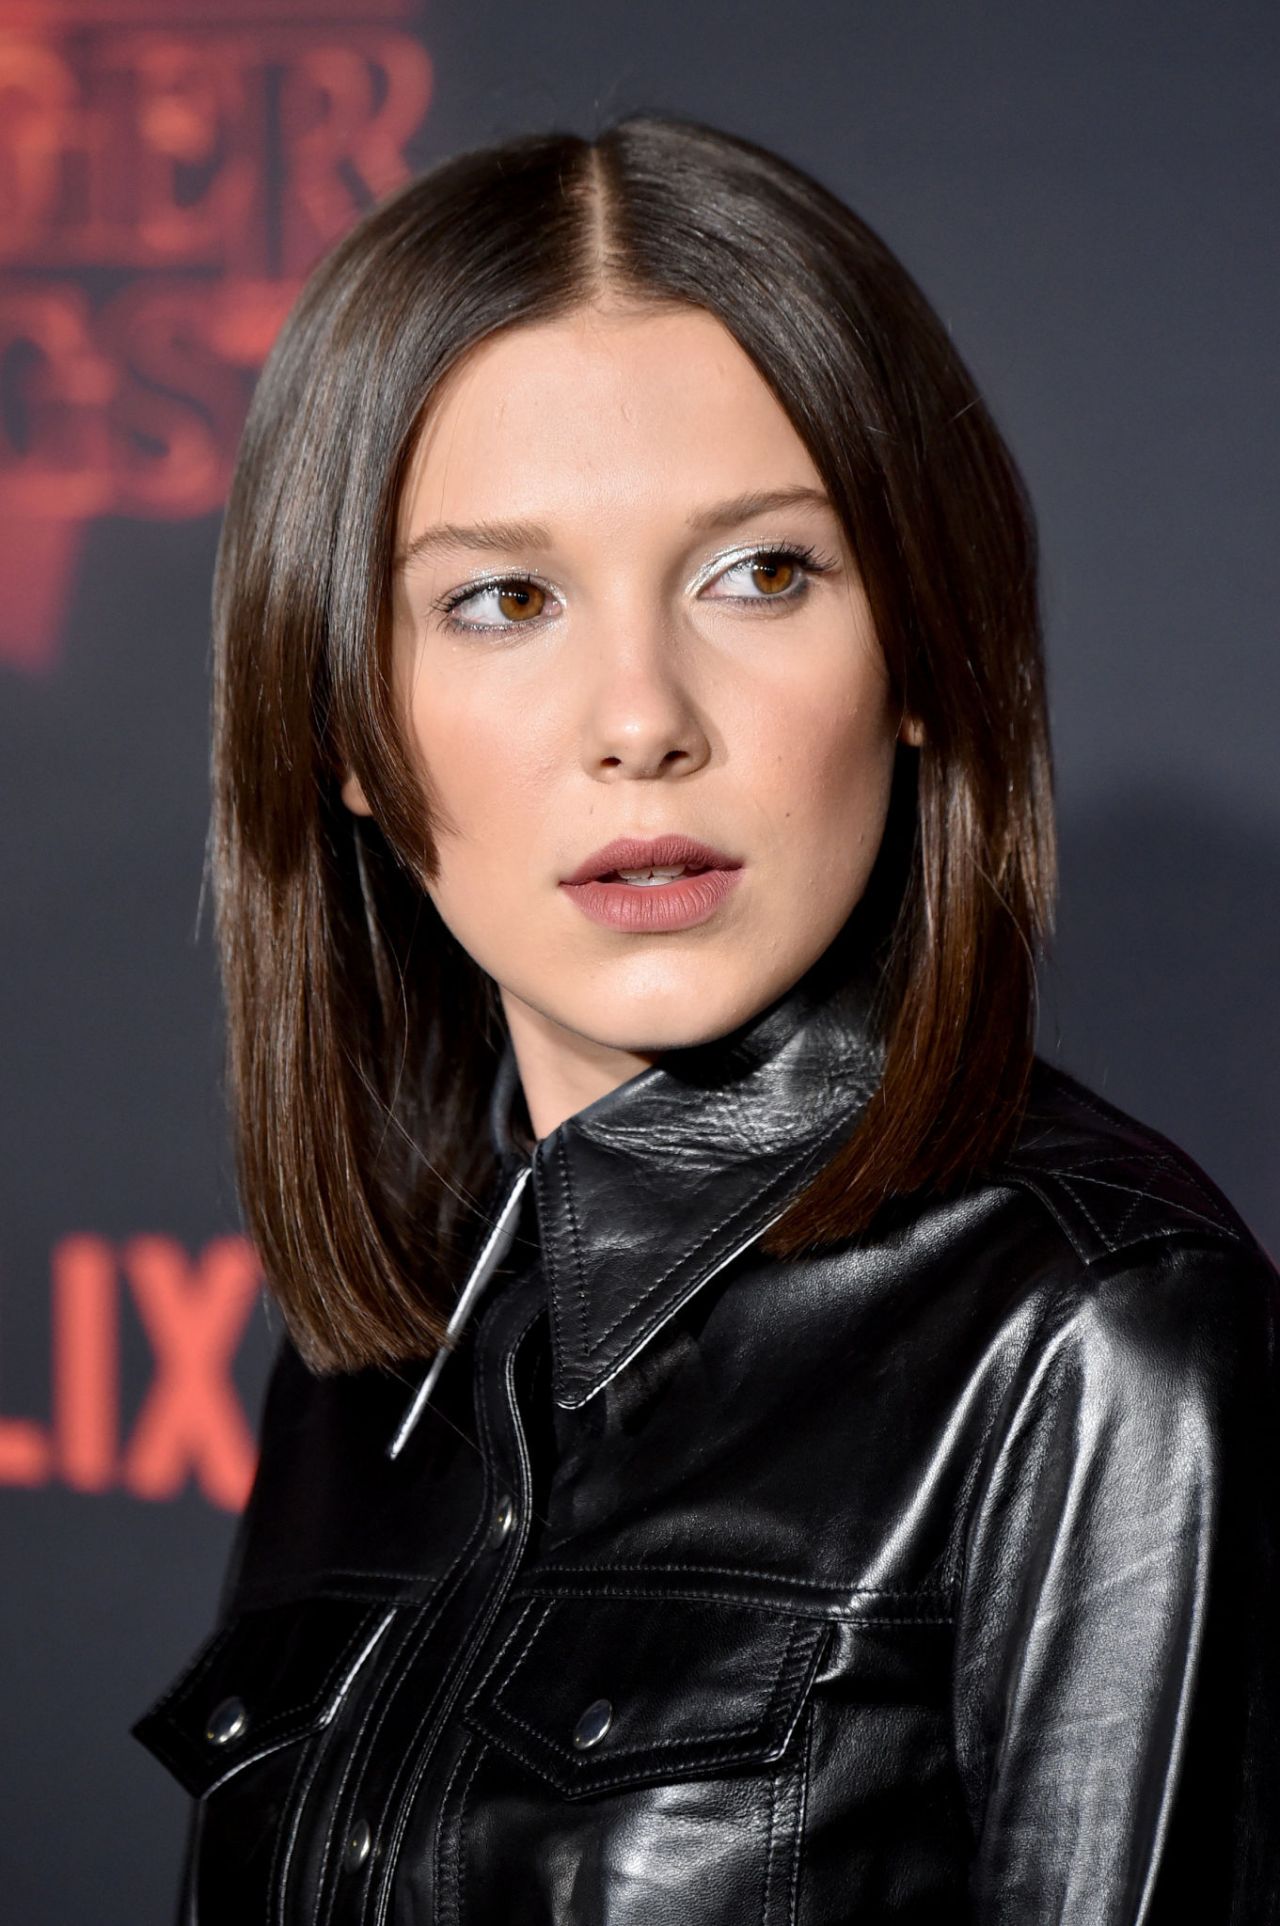 Millie Bobby Brown Steps Out At The Stranger Things P - vrogue.co